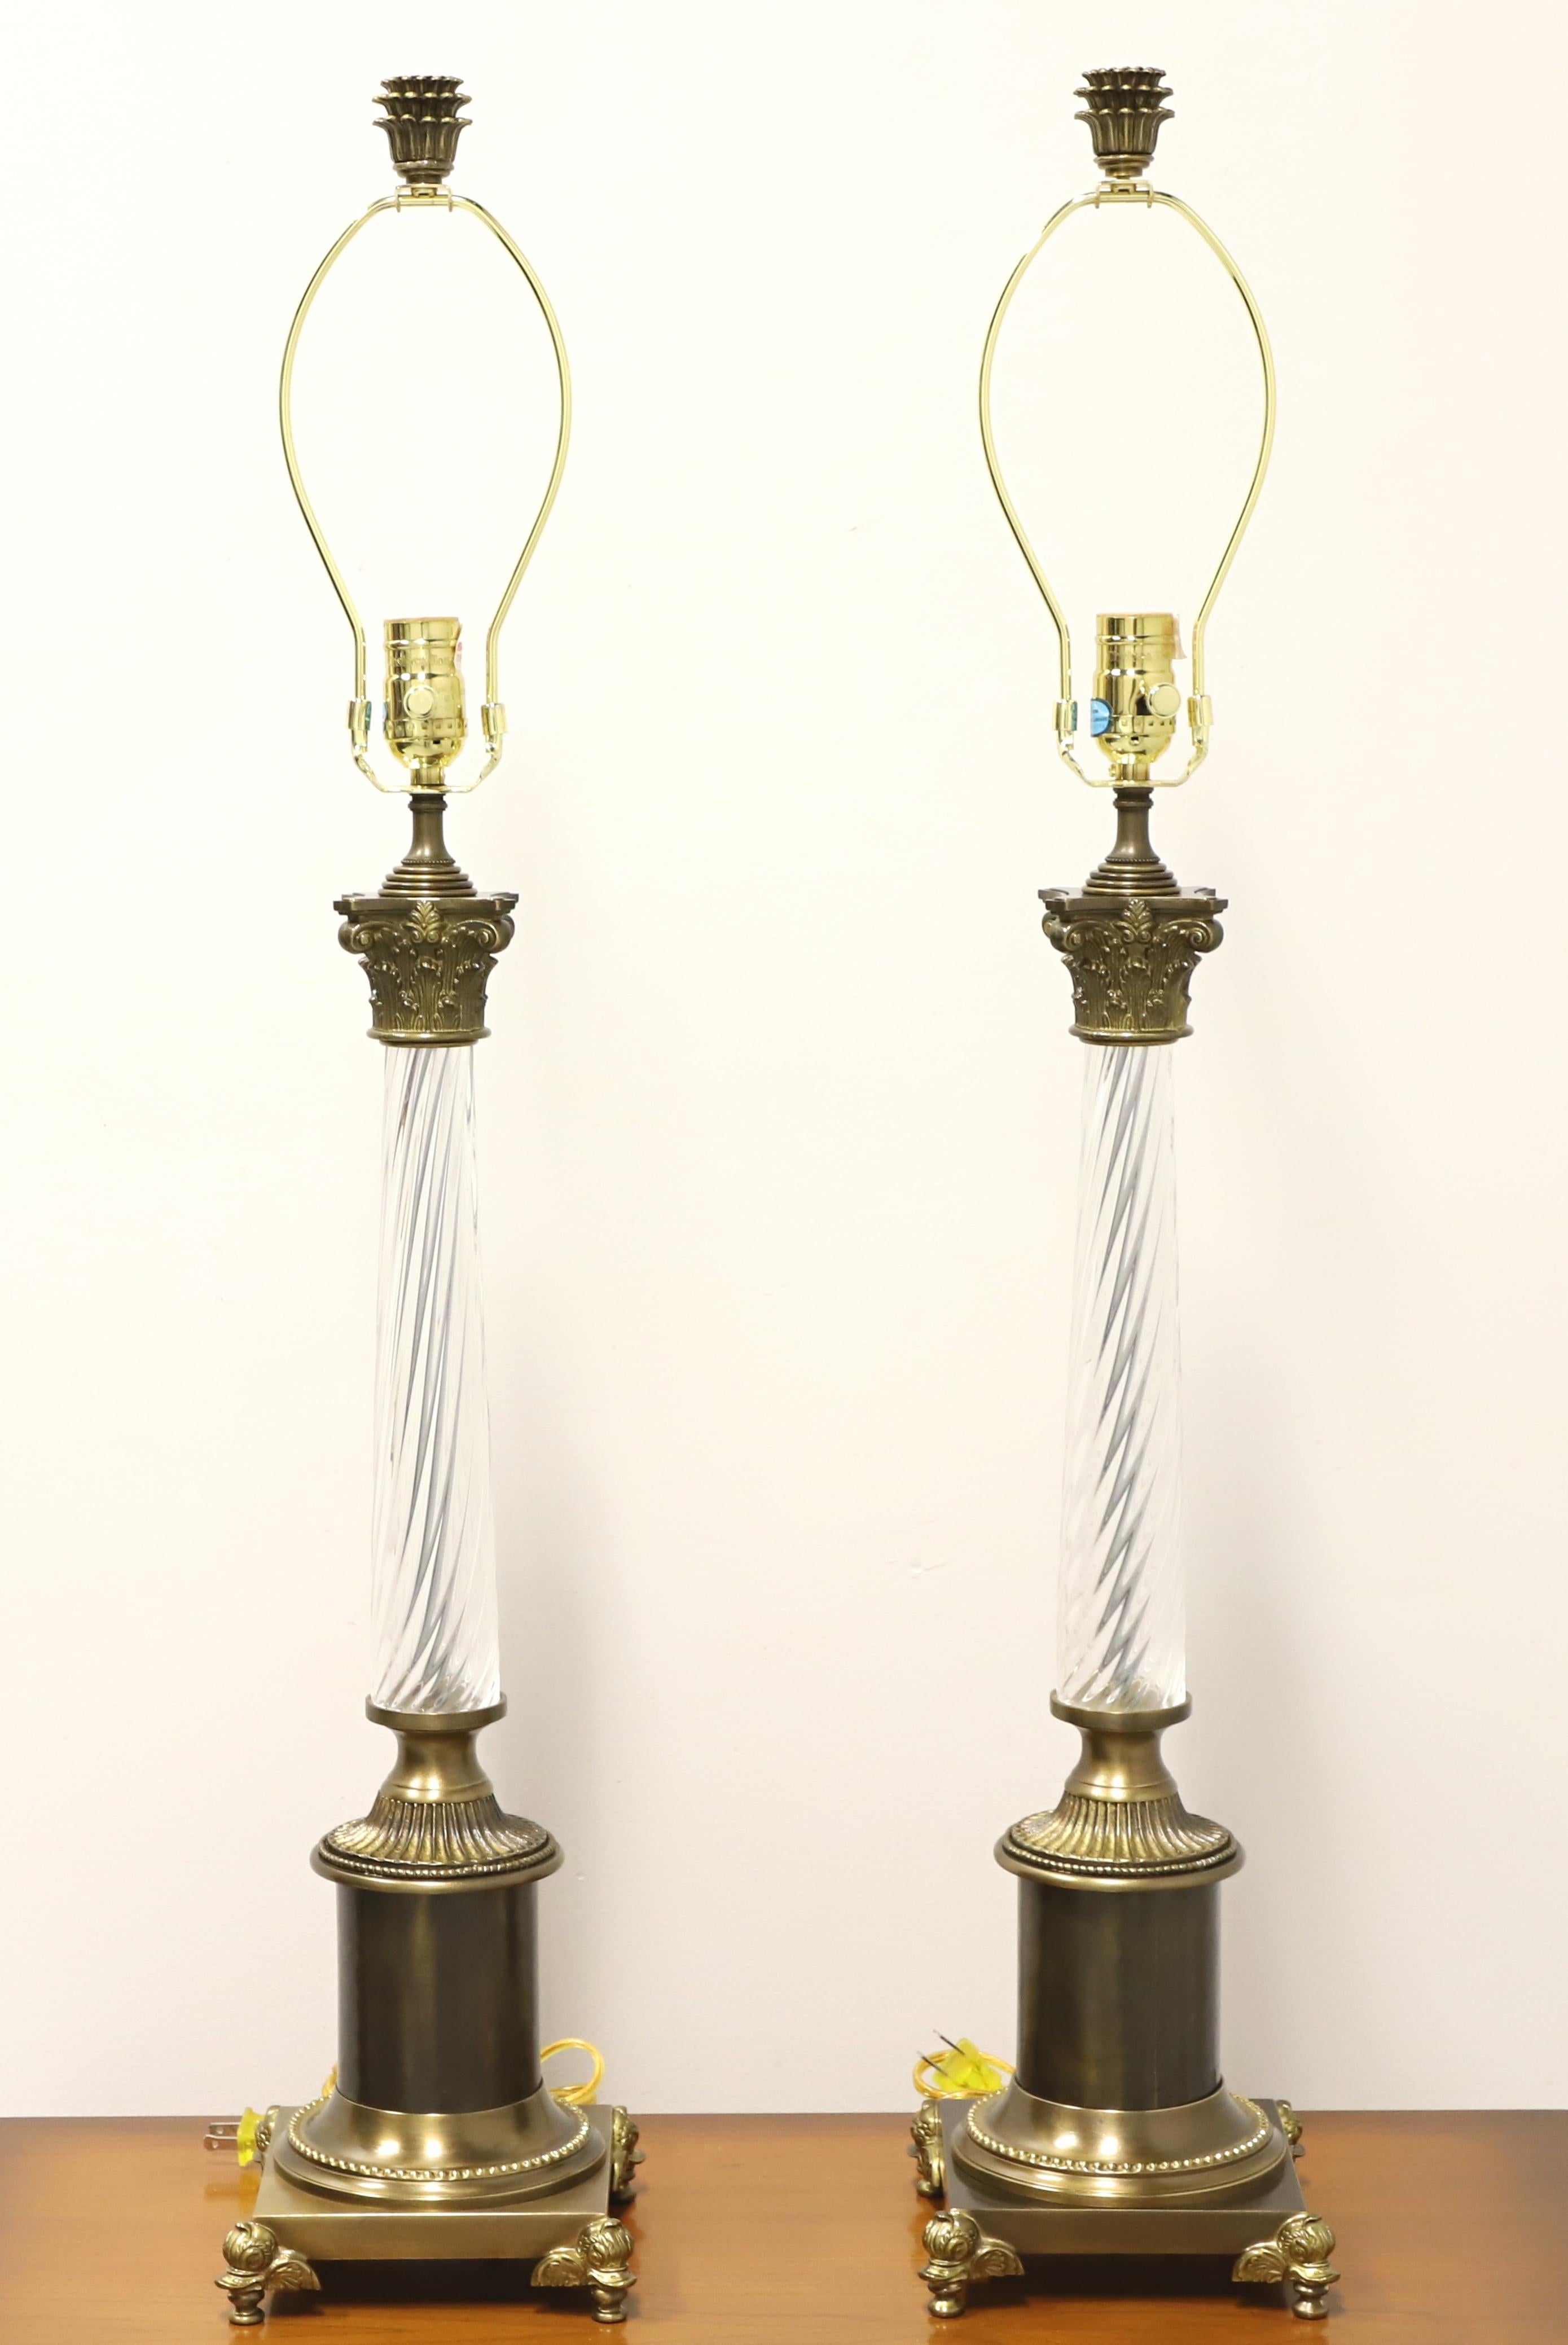 A pair of Traditional style table lamps by Chelsea House. Made of solid brass in the shape of a Ionic column with a swirled glass surround and a solid base with duck head feet at the four corners. Each has a metal harp and decorative brass finial.